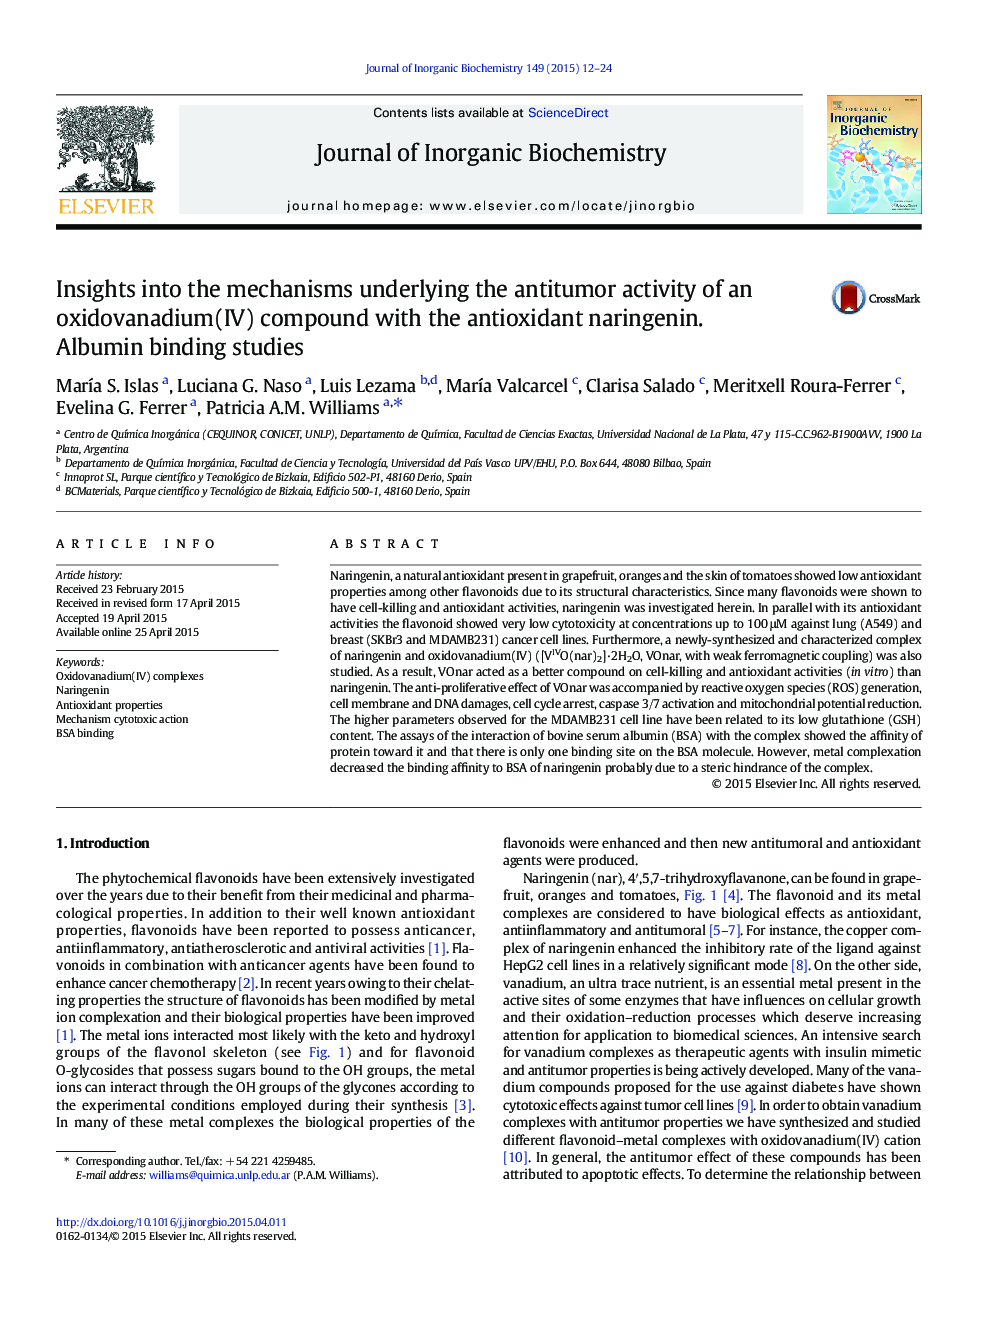 Insights into the mechanisms underlying the antitumor activity of an oxidovanadium(IV) compound with the antioxidant naringenin. Albumin binding studies